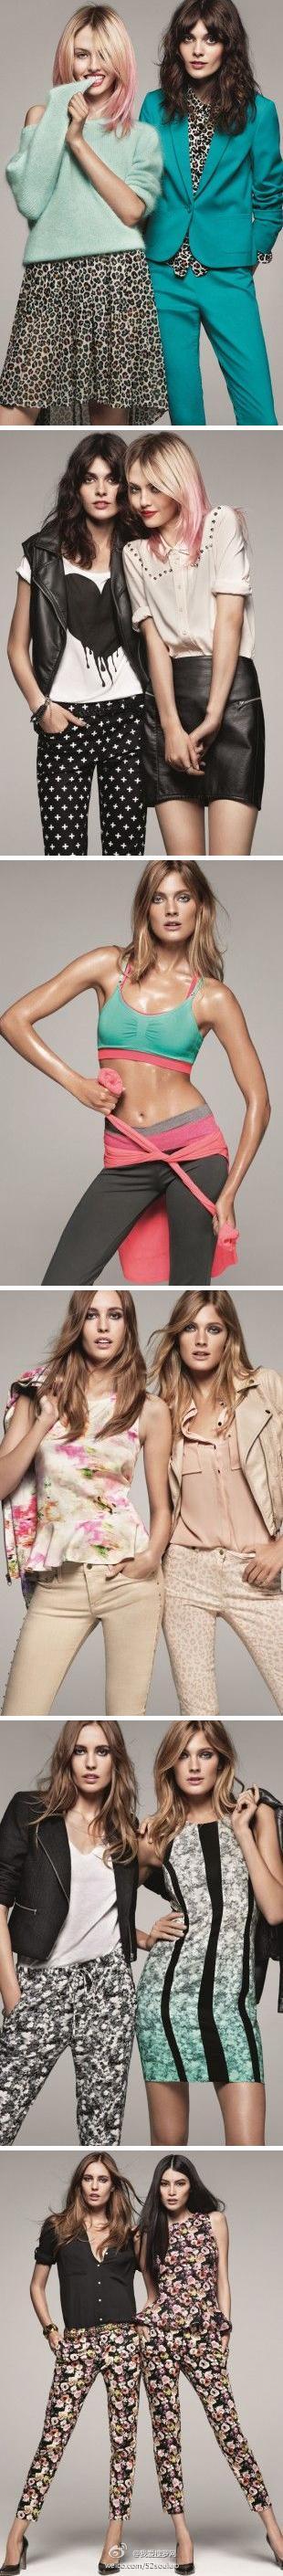 H&M Spring Summer 2013 Collection